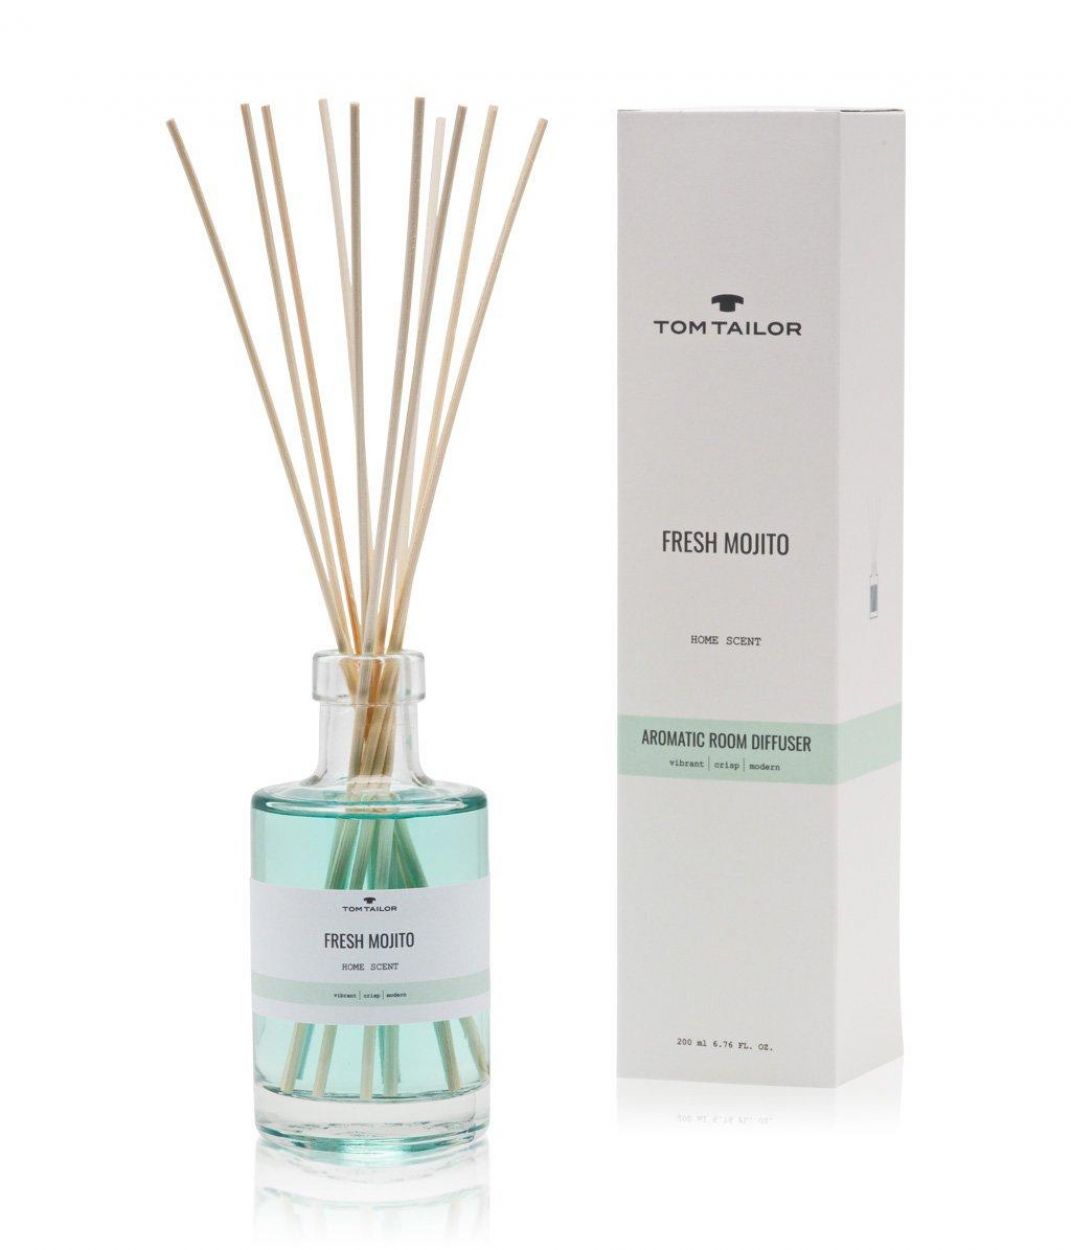 Tom Tailor Lifestyle Aromatic Room Diffuser Fresh Mojito (335148) - WeekendMode